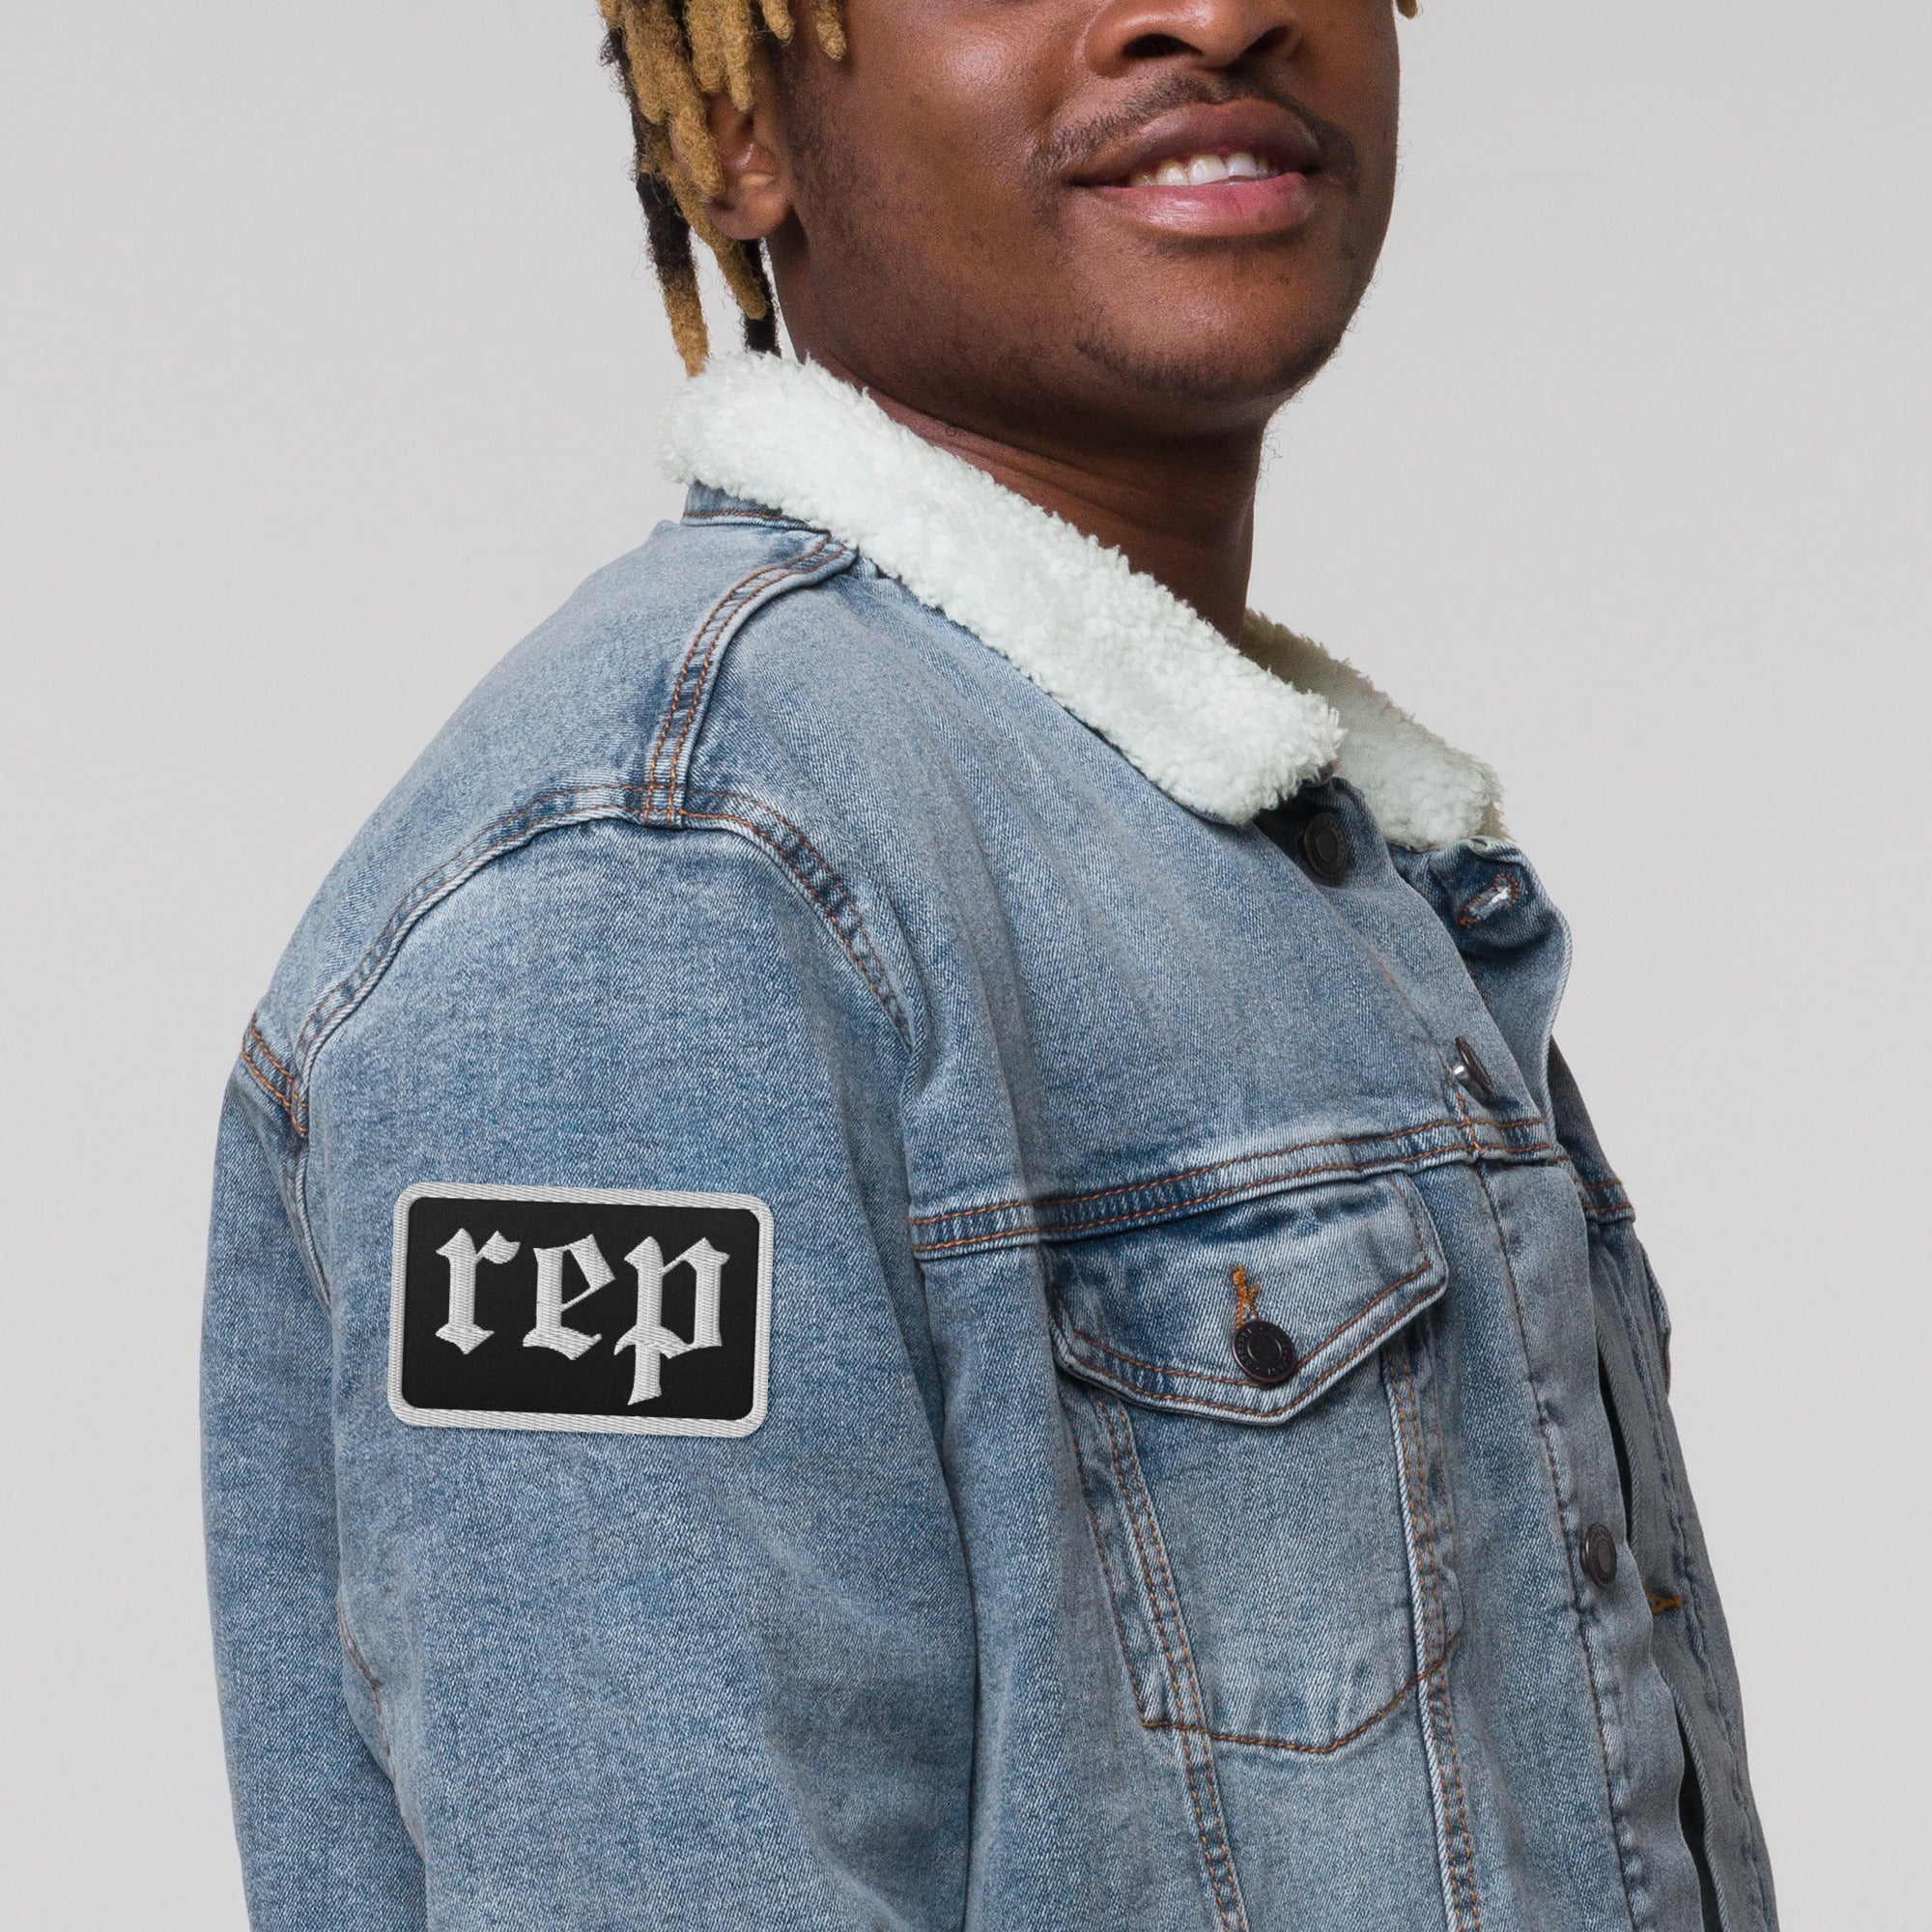 Rep Reputation Black & Silver Embroidered Patch Made to Order 